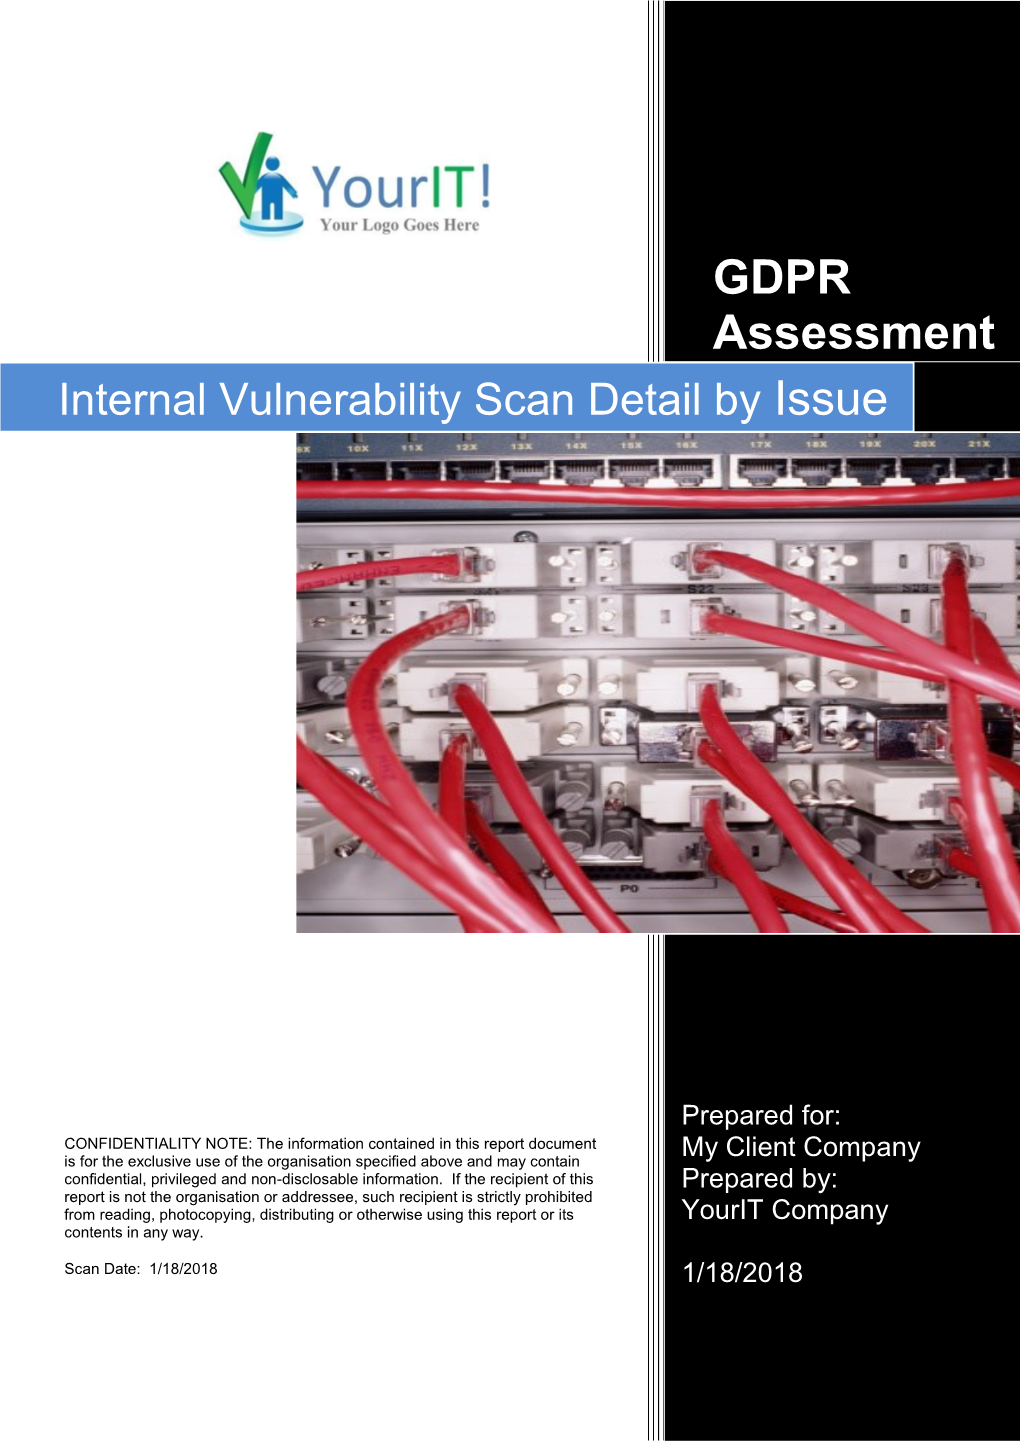 GDPR Assessment Internal Vulnerability Scan Detail by Issue